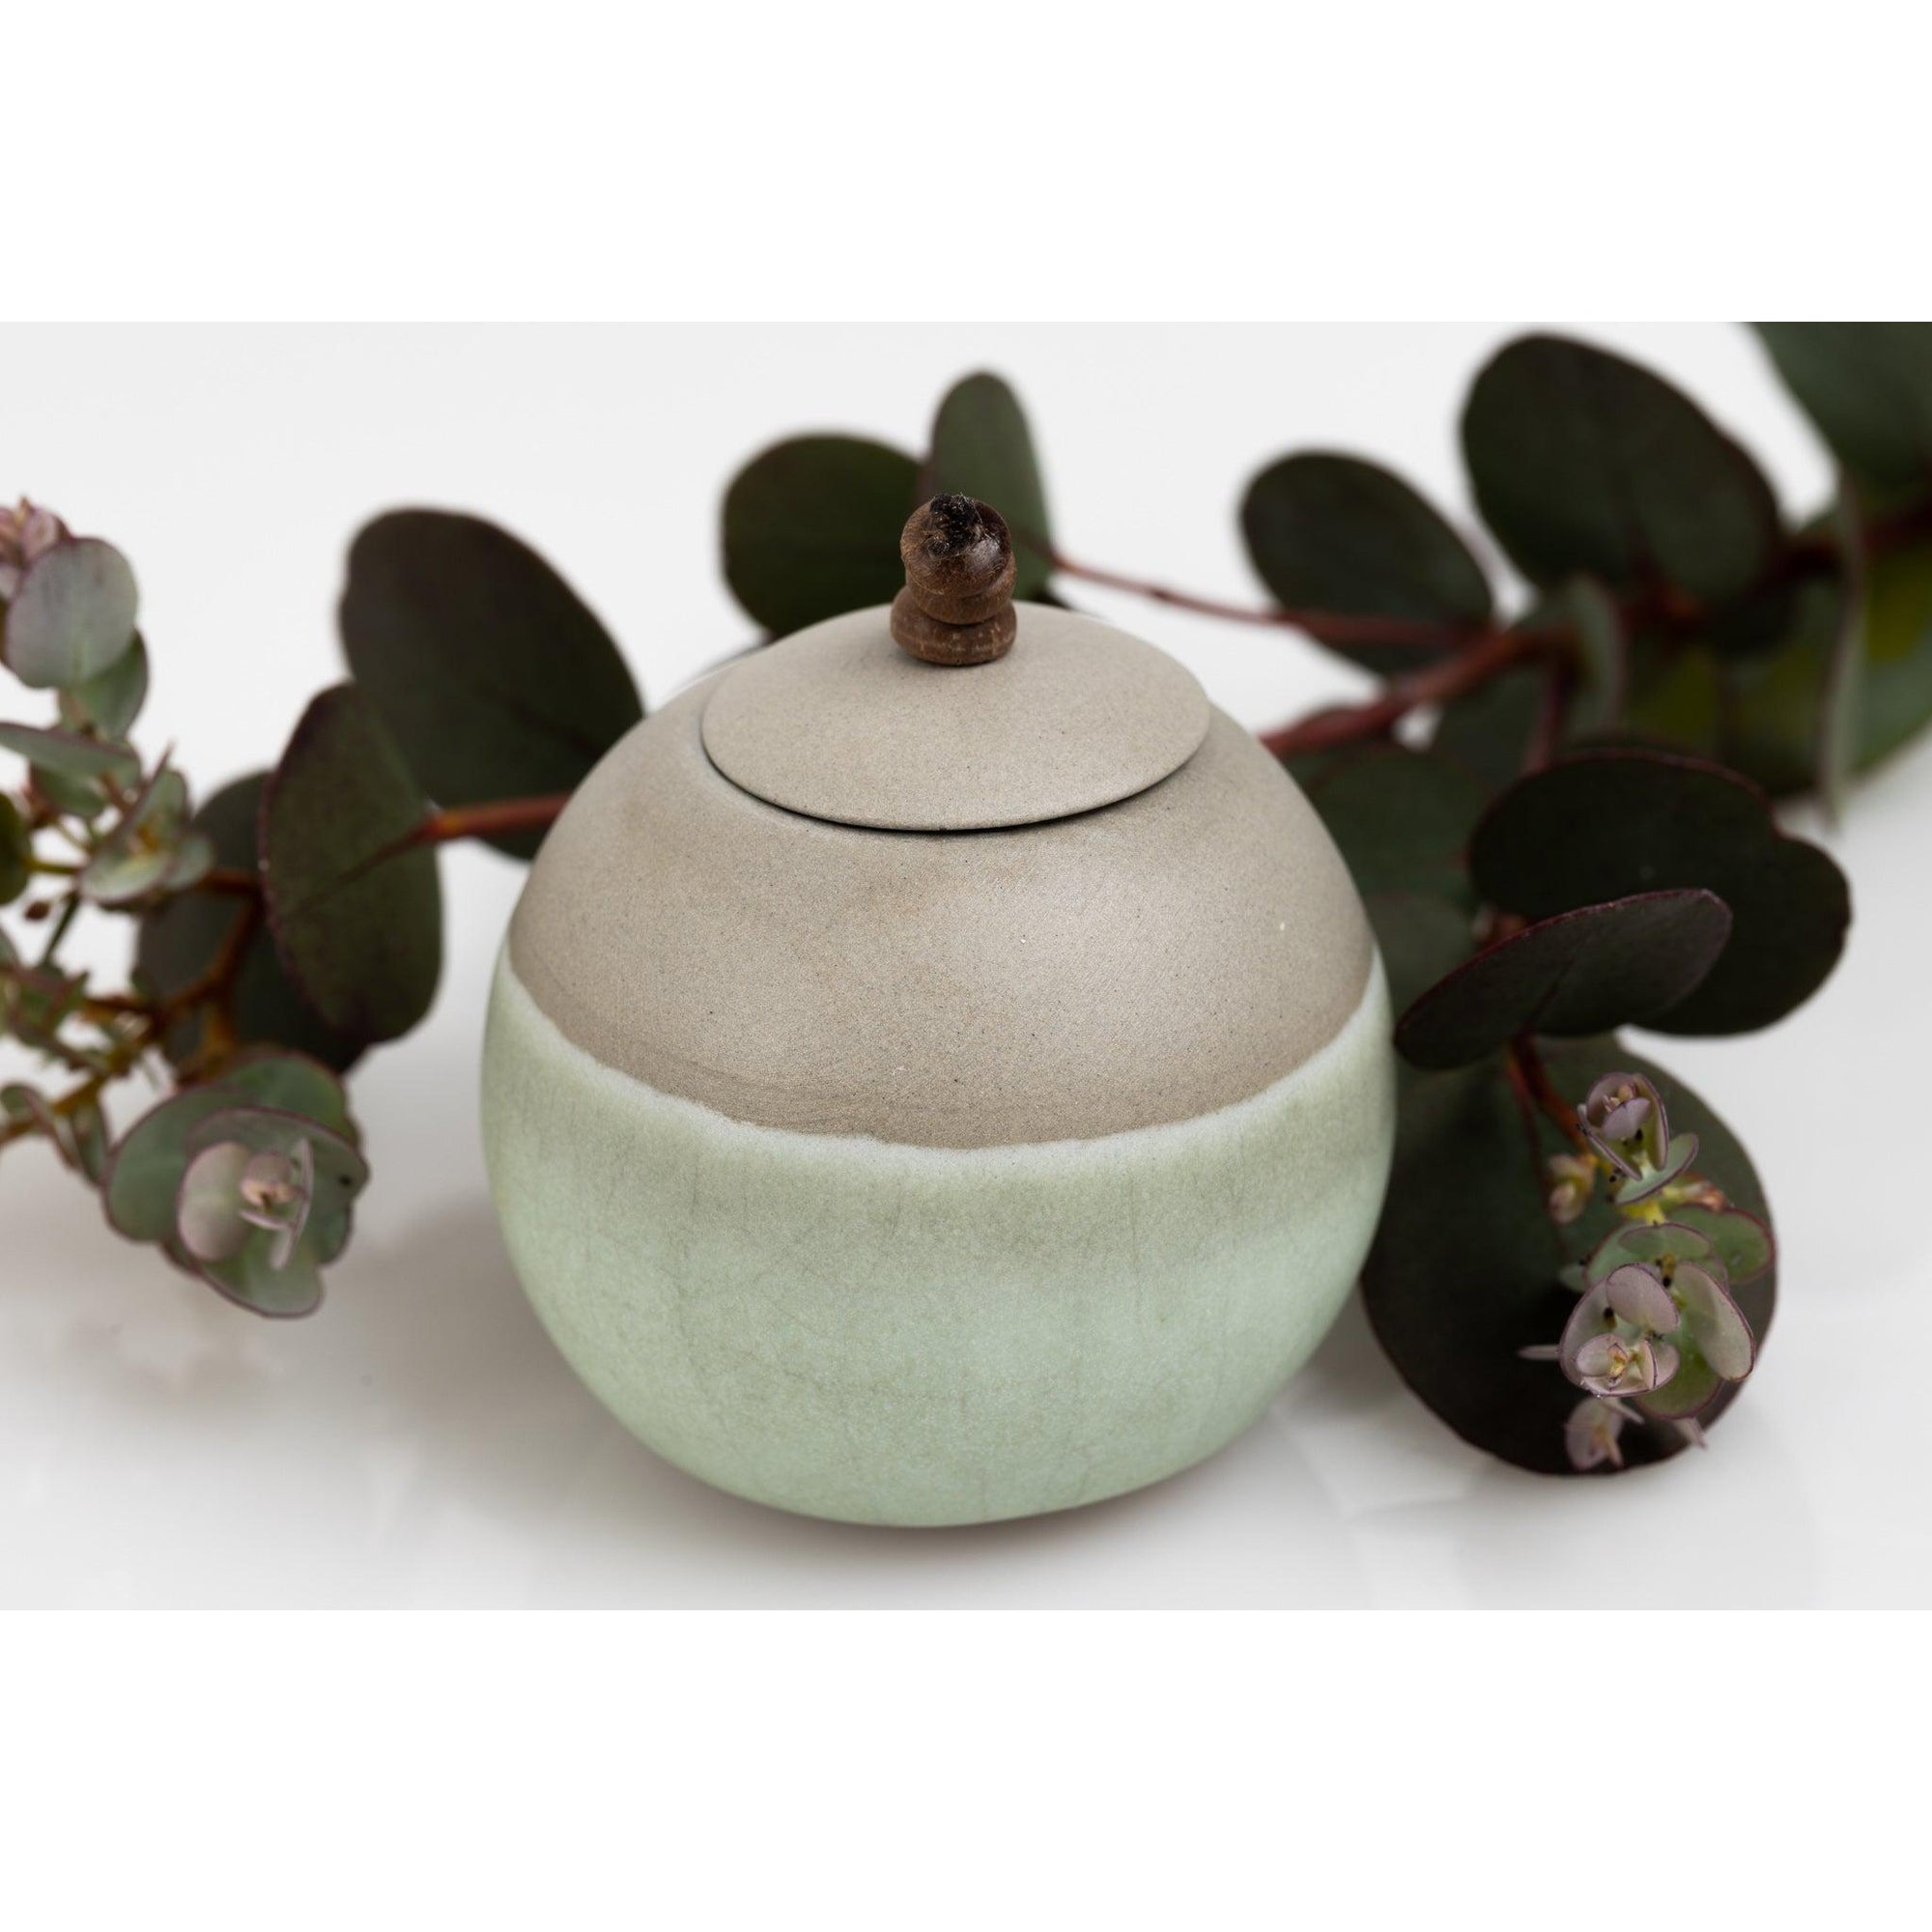 KSF3 Lunar, Stoneware Sphere Pot by Kate Schuricht, available at Padstow Gallery, Cornwall